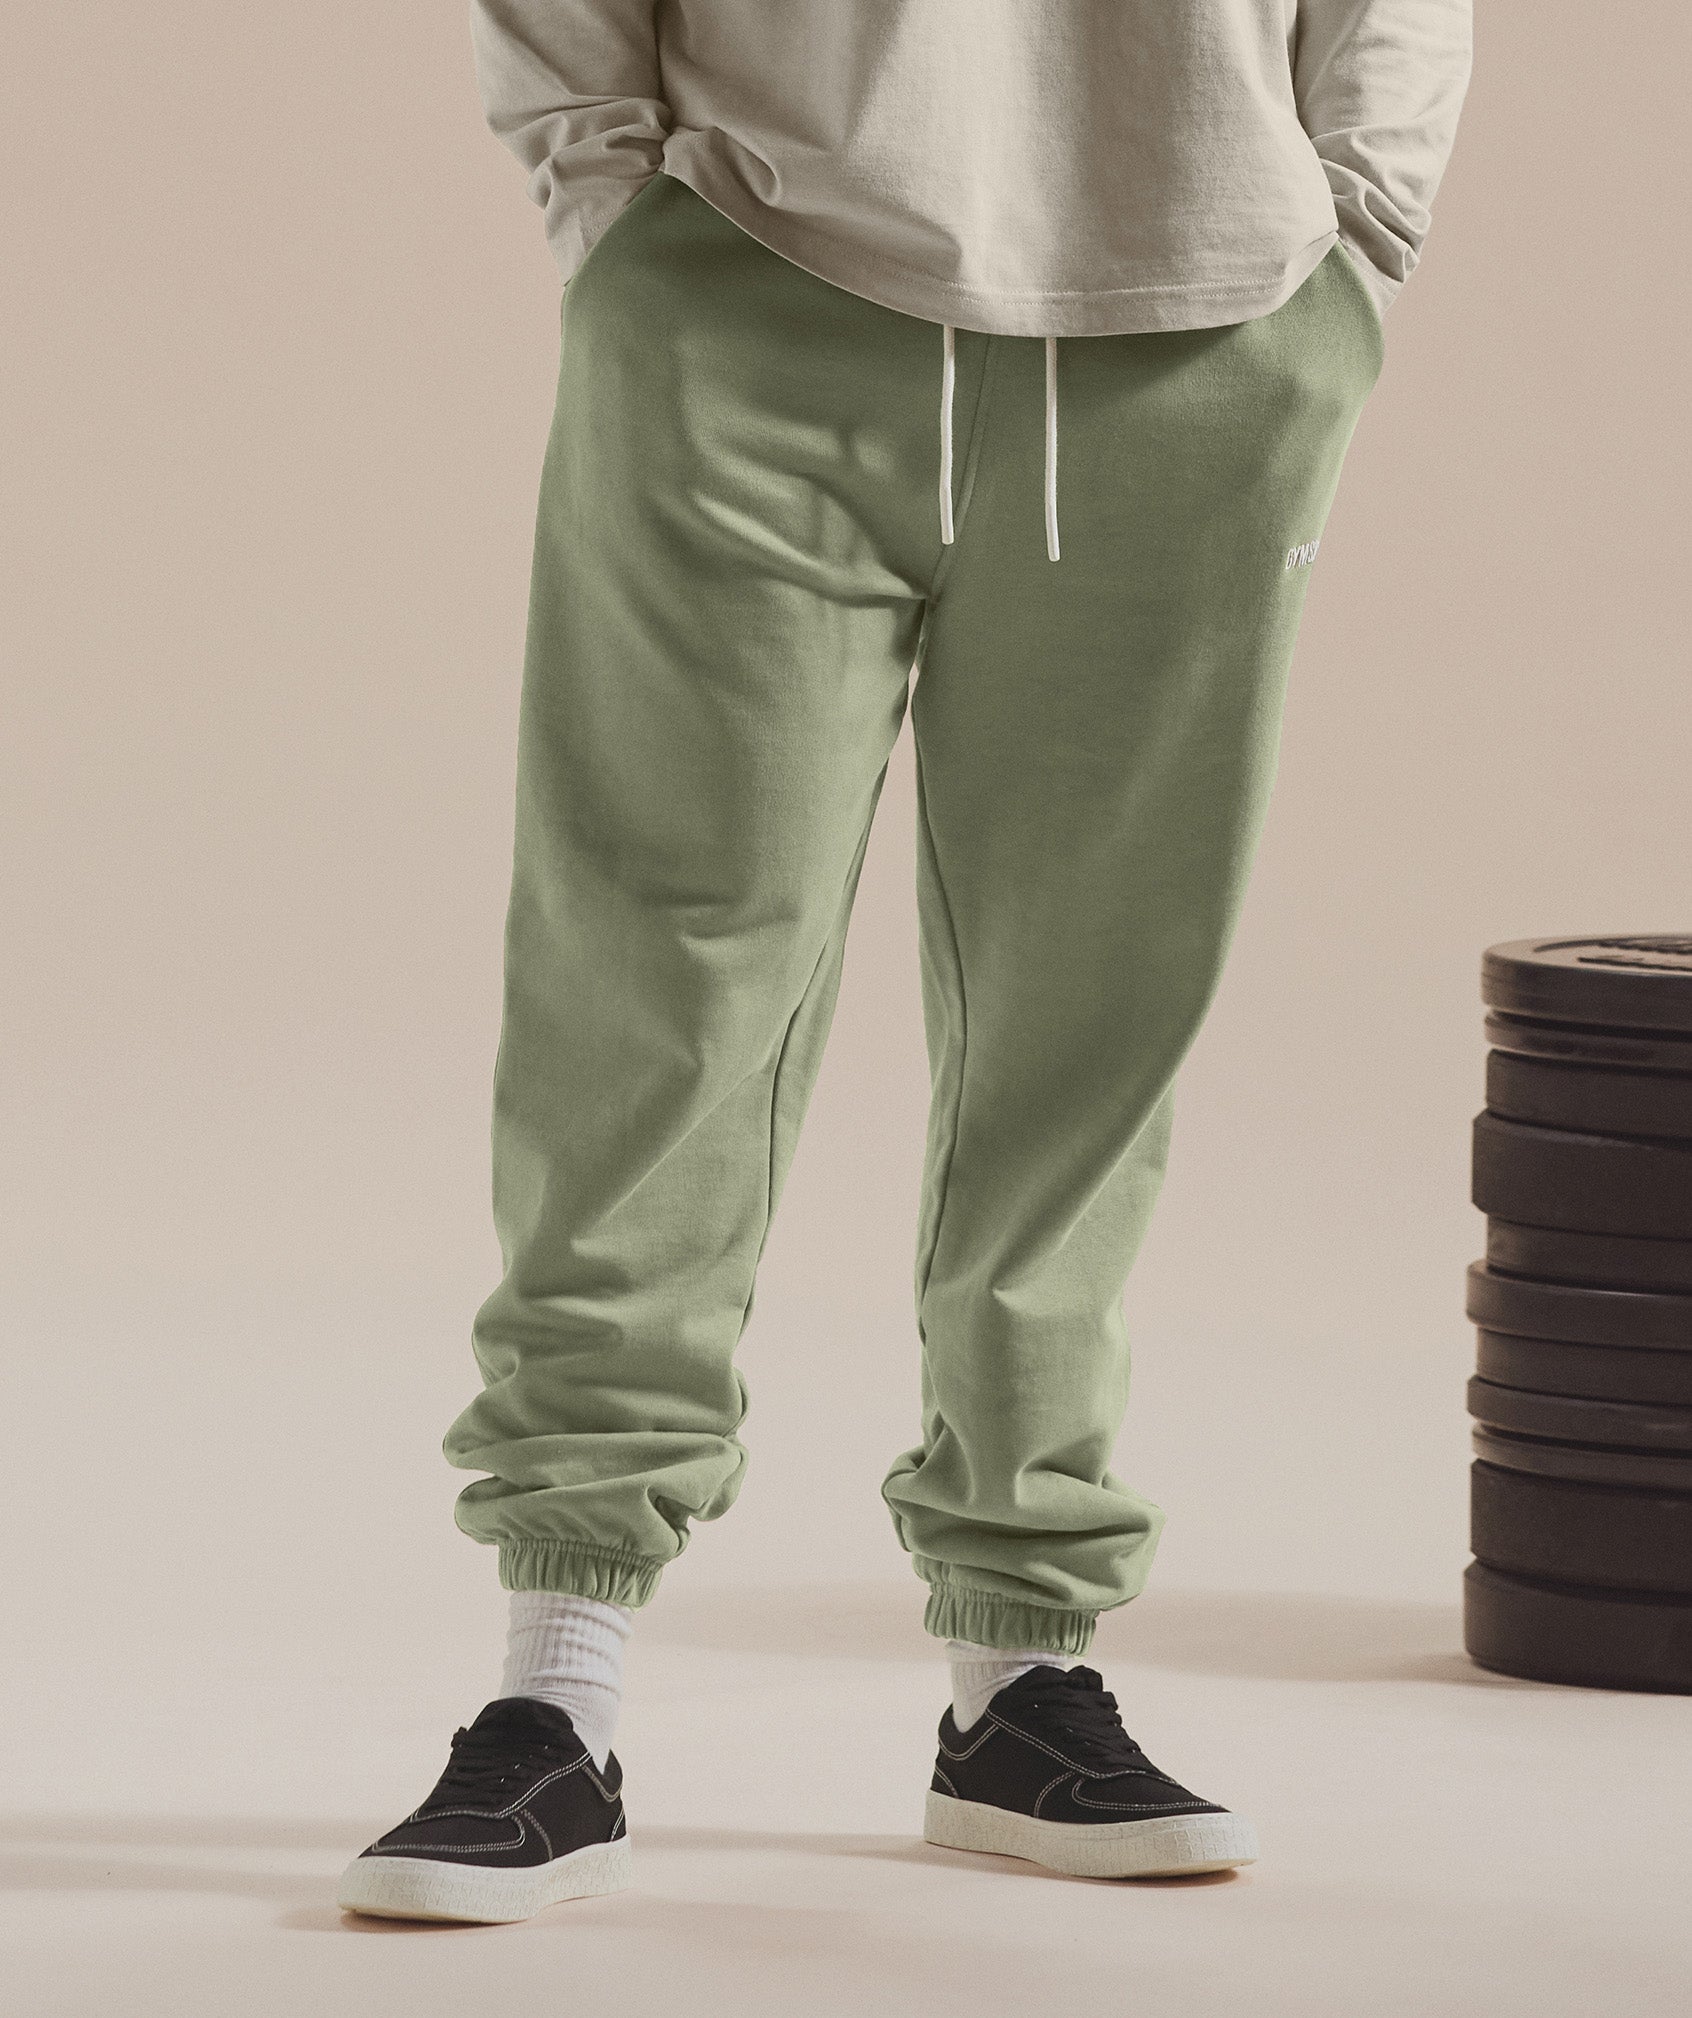 Rest Day Sweats Joggers in Sage Green - view 1